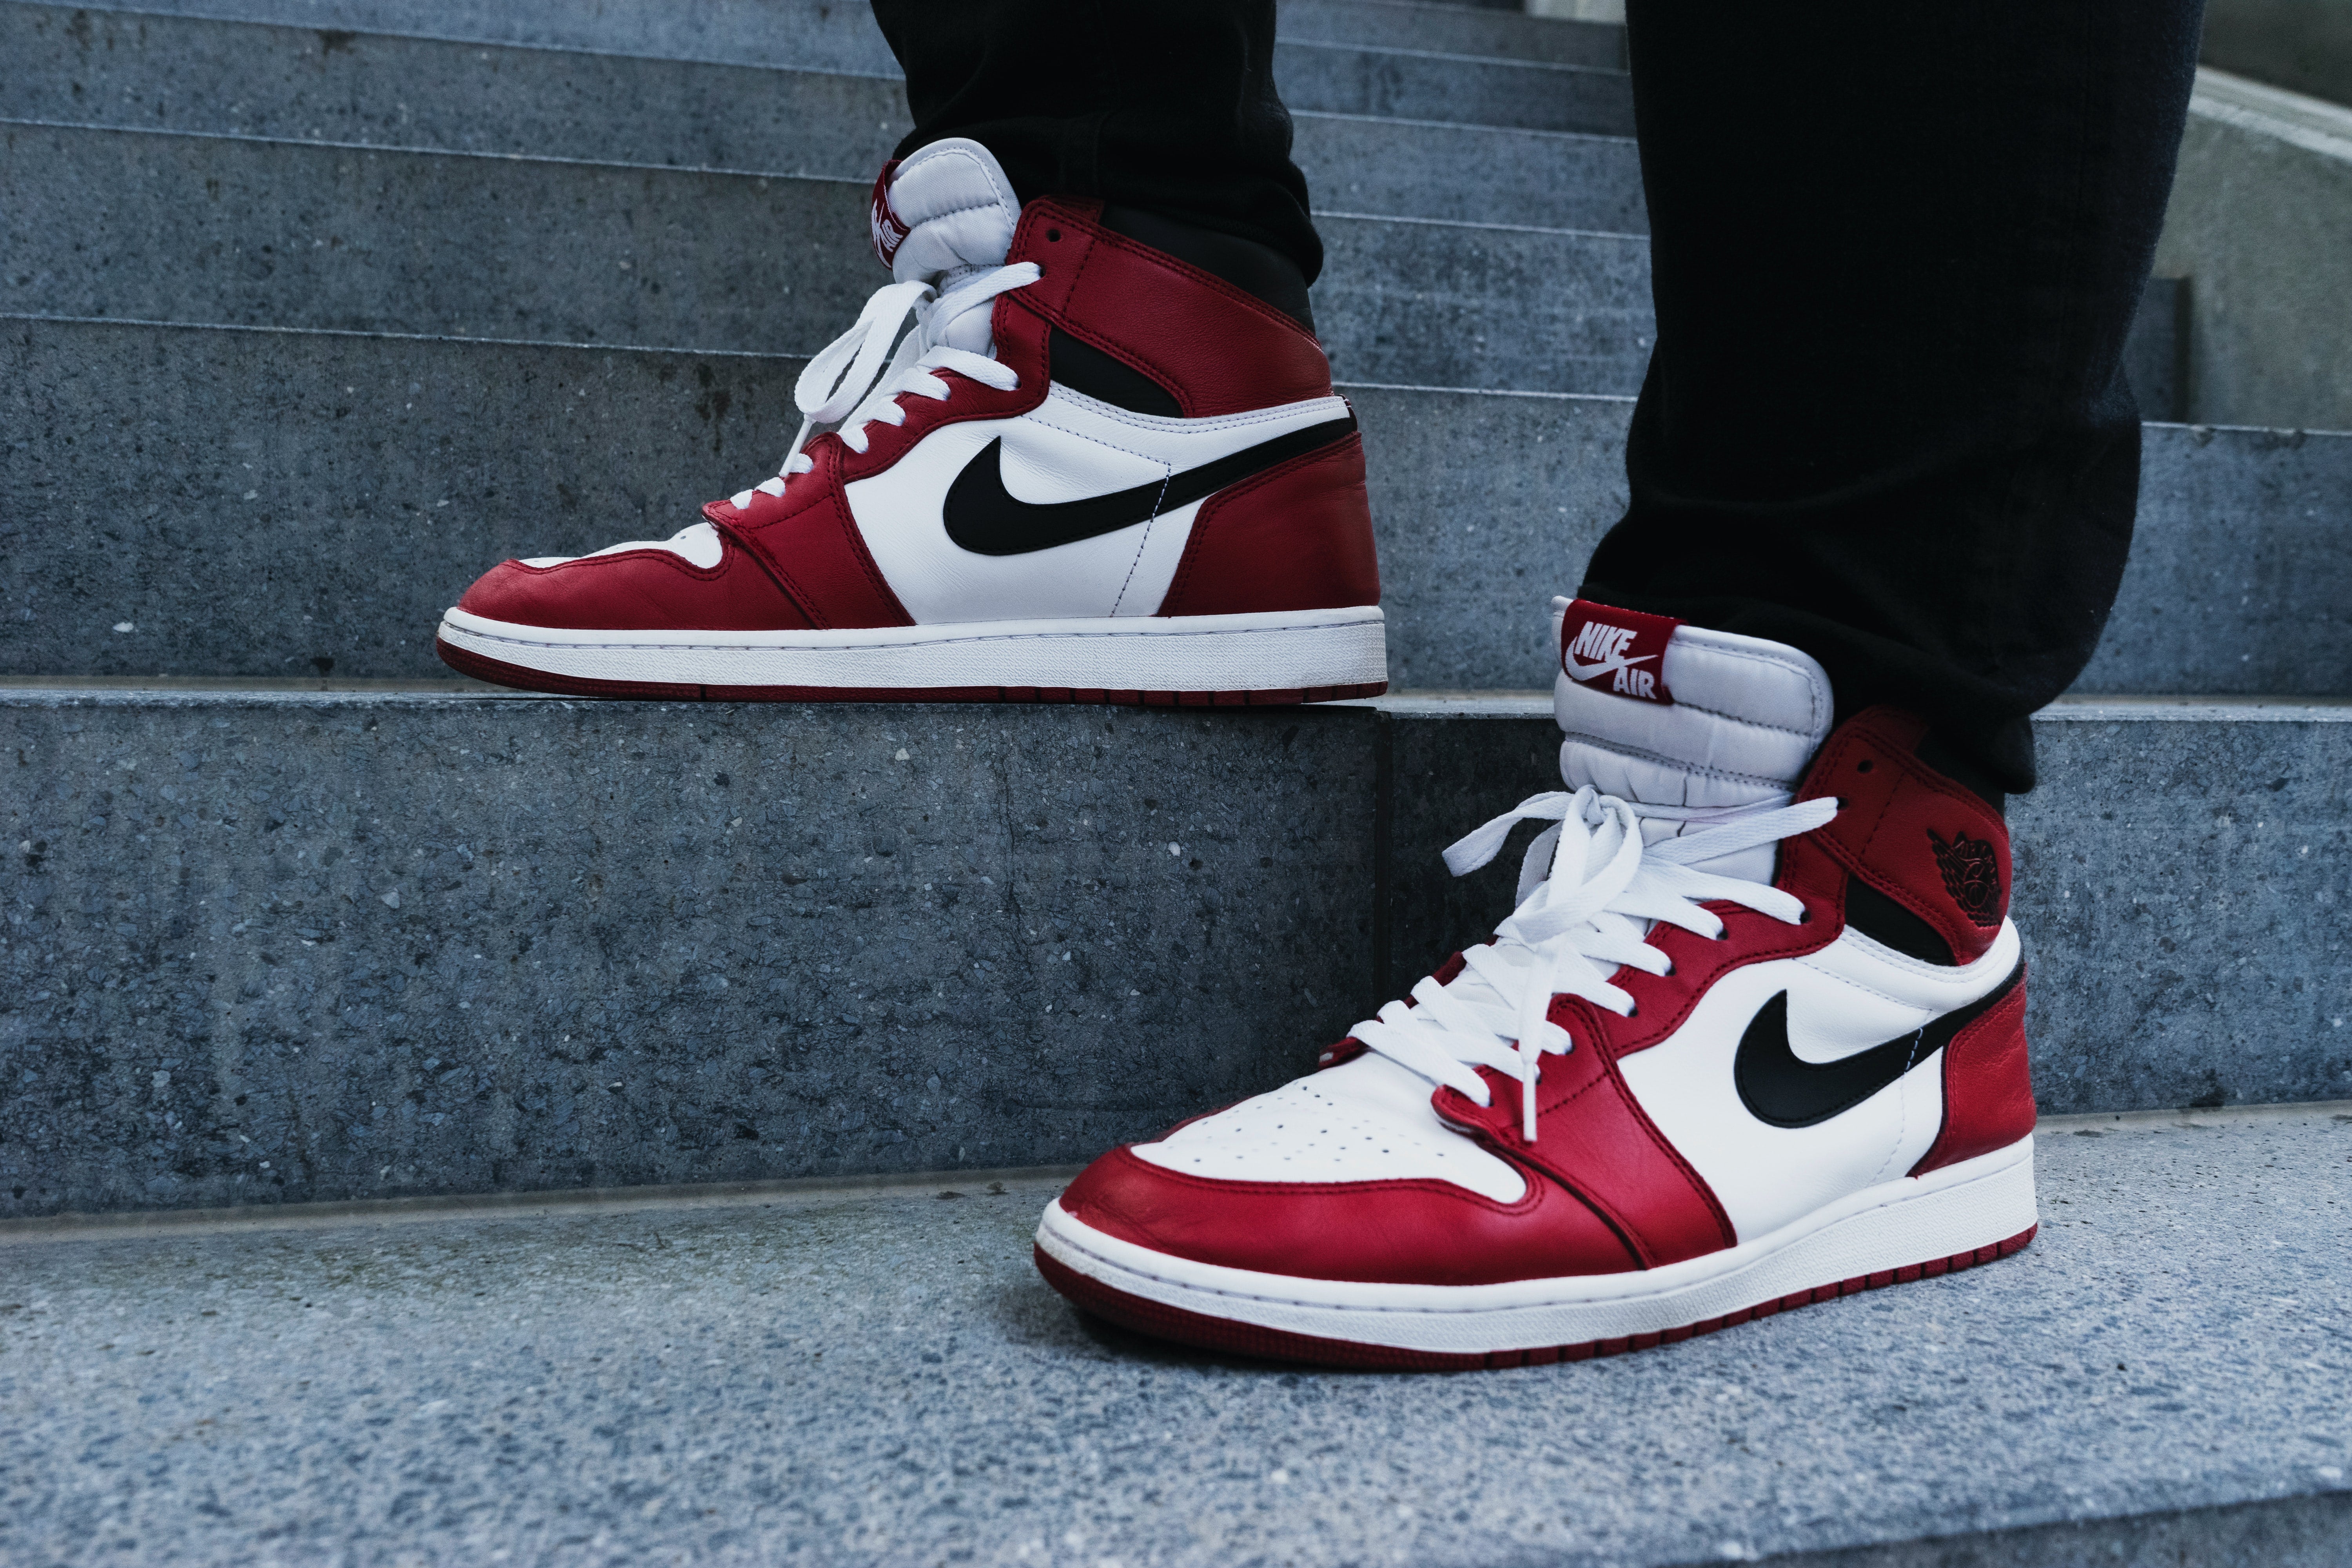 If Invested $1,000 In Nike Stock When Air Jordan Shoes Were Released, Here's How Much Now - Nike (NYSE:NKE) - Benzinga